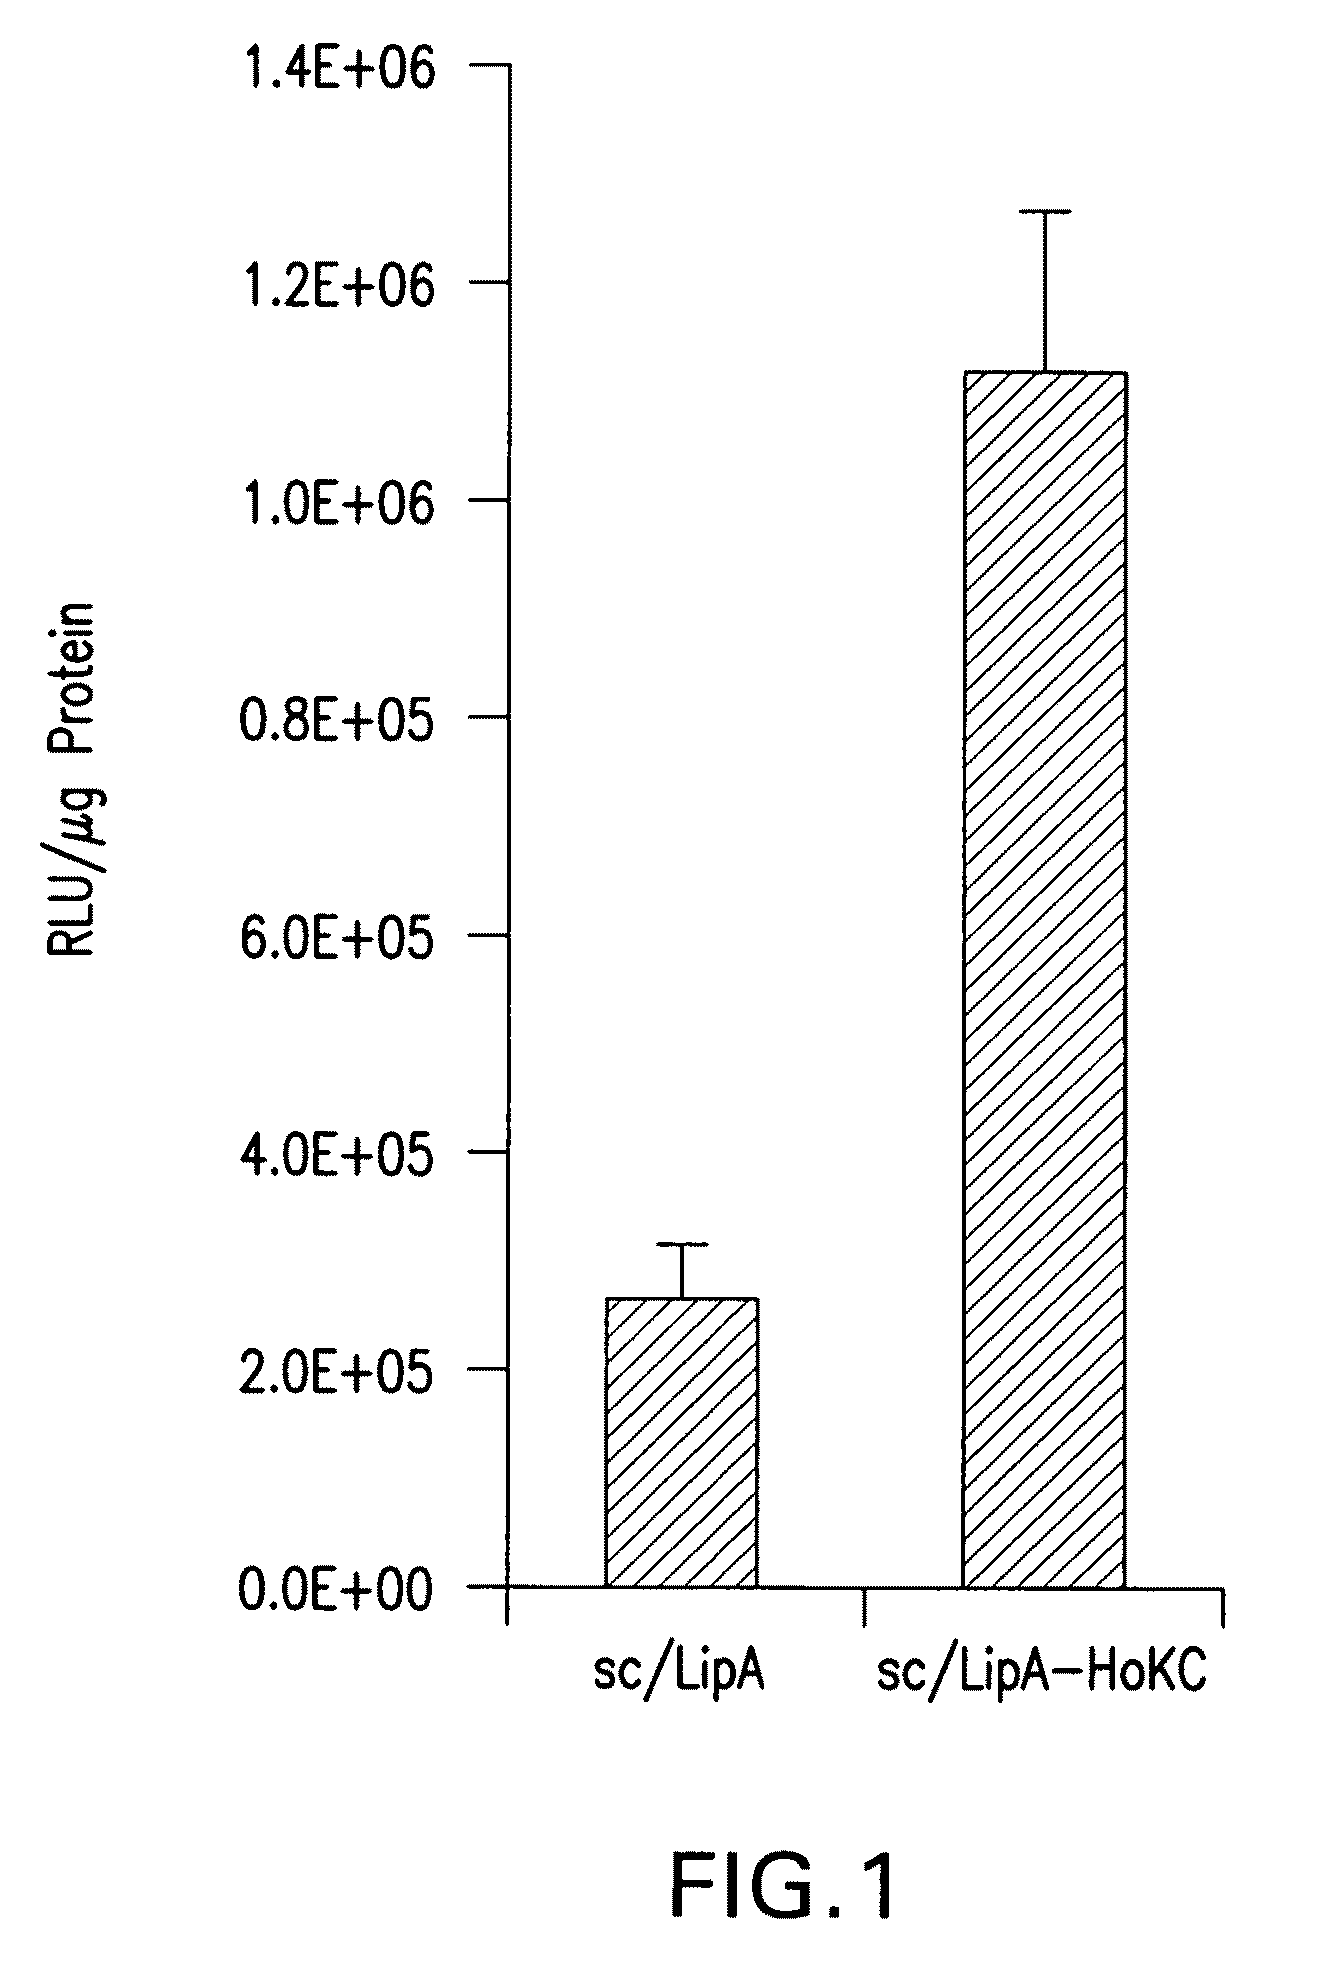 Methods for generating immune response using cationic-liposome-mediated nucleic acid delivery